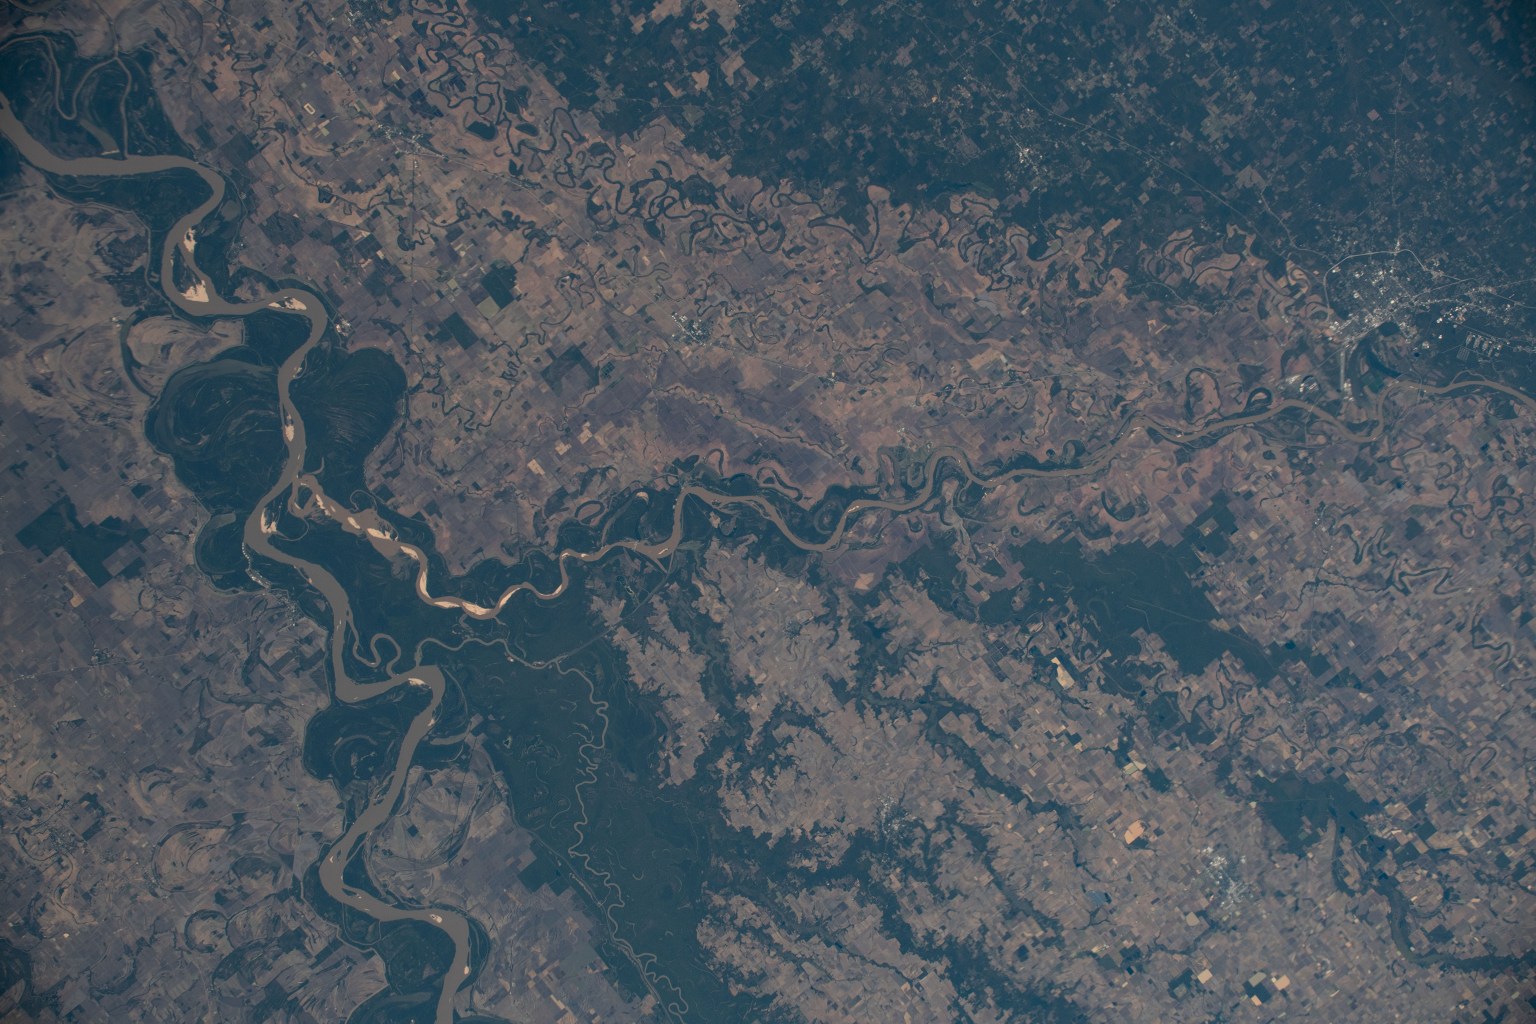 The Mississippi River separates the states of Mississippi and Arkansas and splits into the Arkansas River. The International Space Station was orbiting 255 miles in altitude and 164 miles west of Memphis, Tennessee, when this photograph was taken.